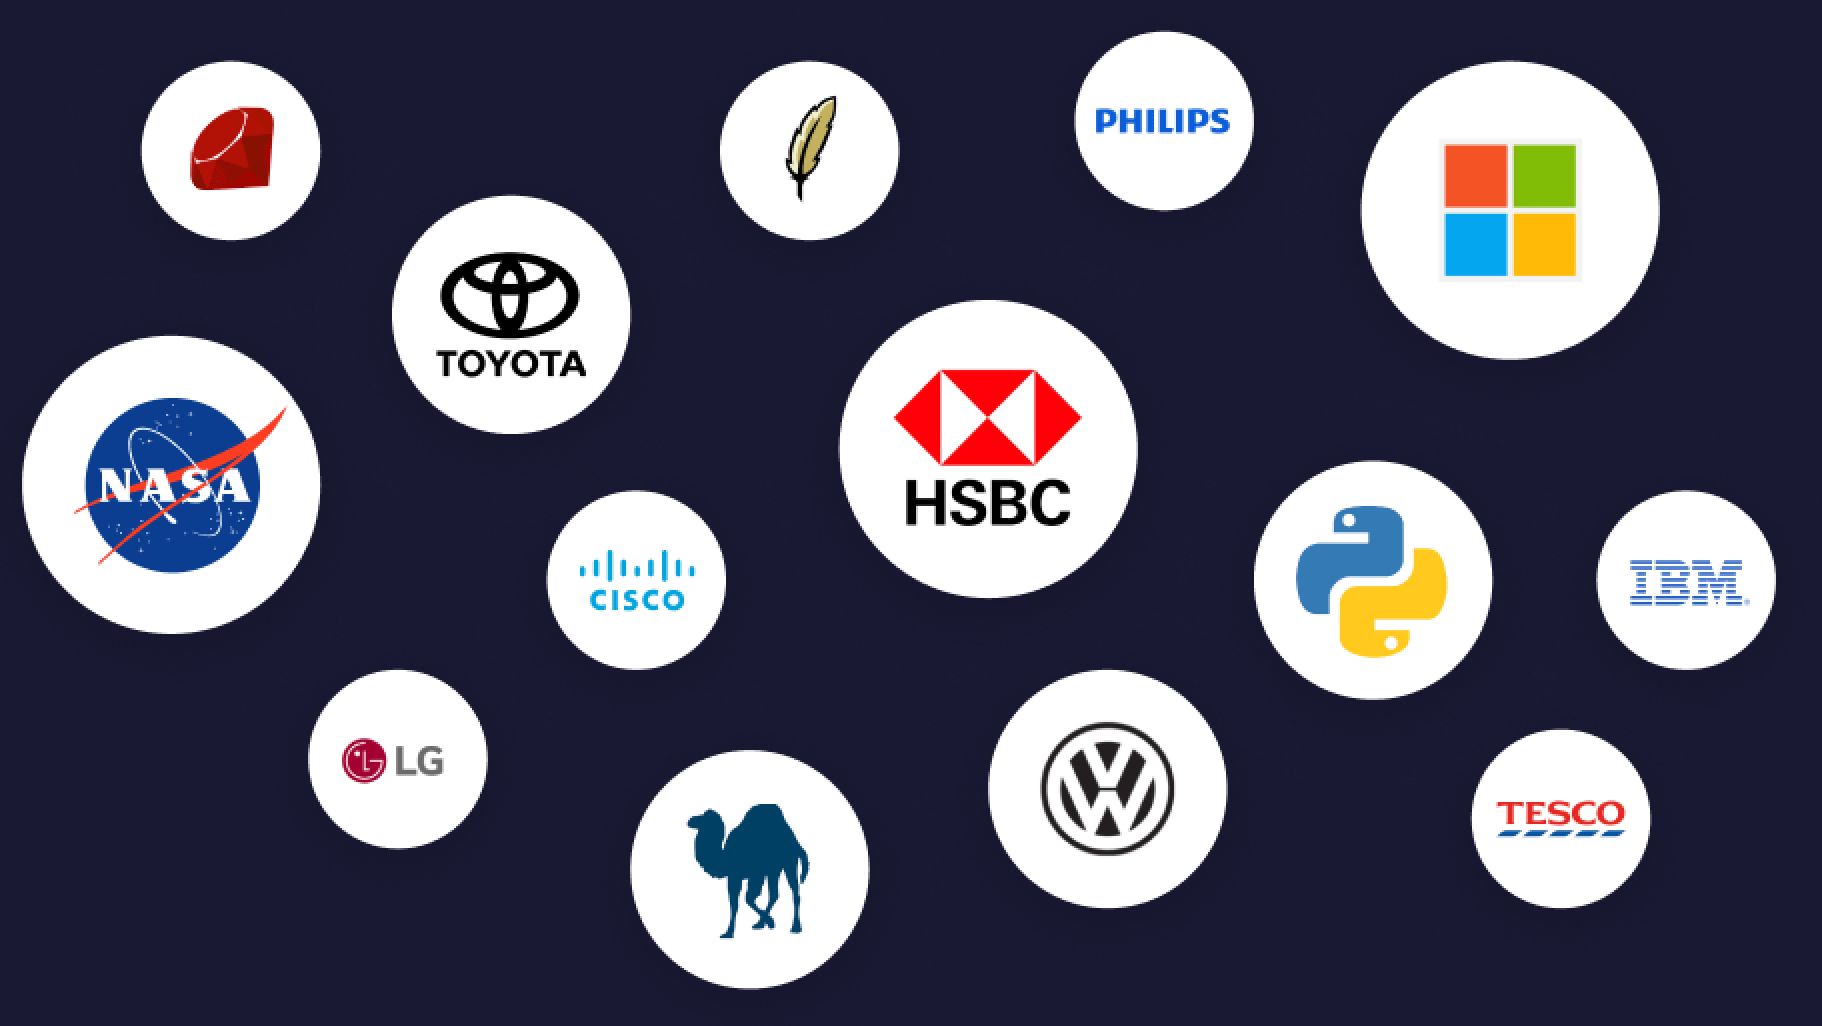 Our Enterprise Brands and Languages